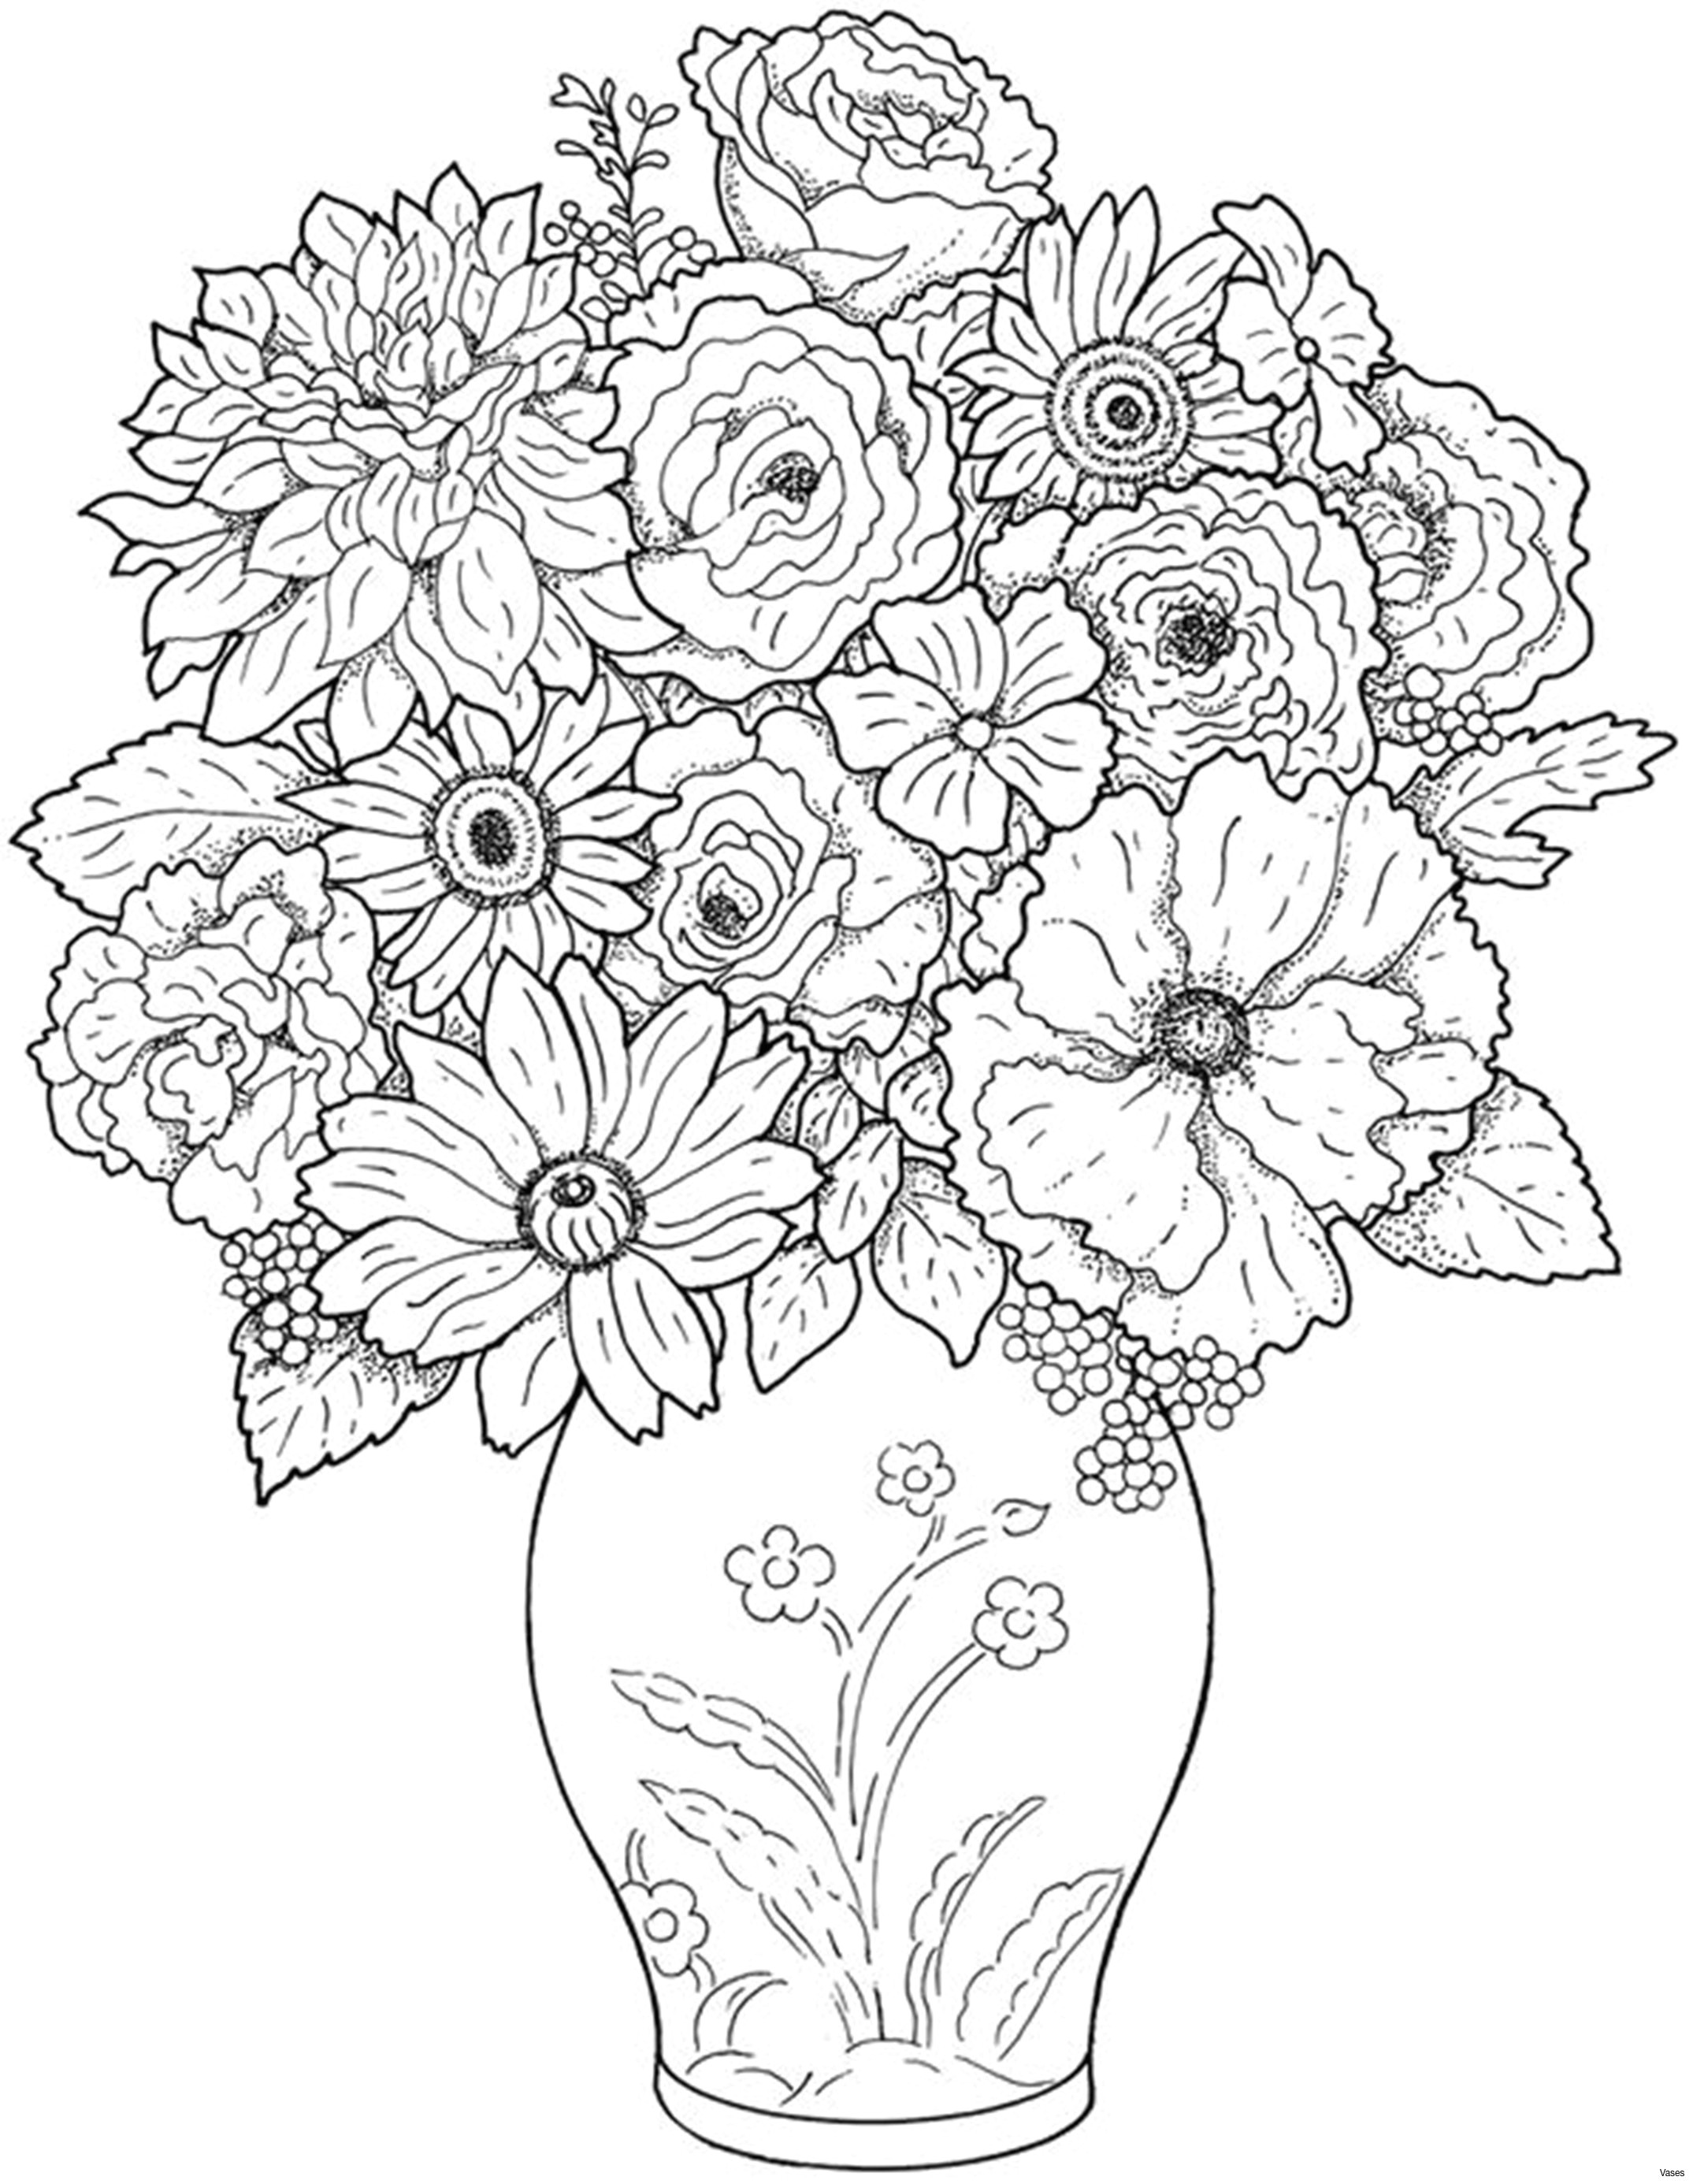 Drawings Of Roses In A Vase Www Colouring Pages Aua Ergewohnliche Cool Vases Flower Vase Coloring